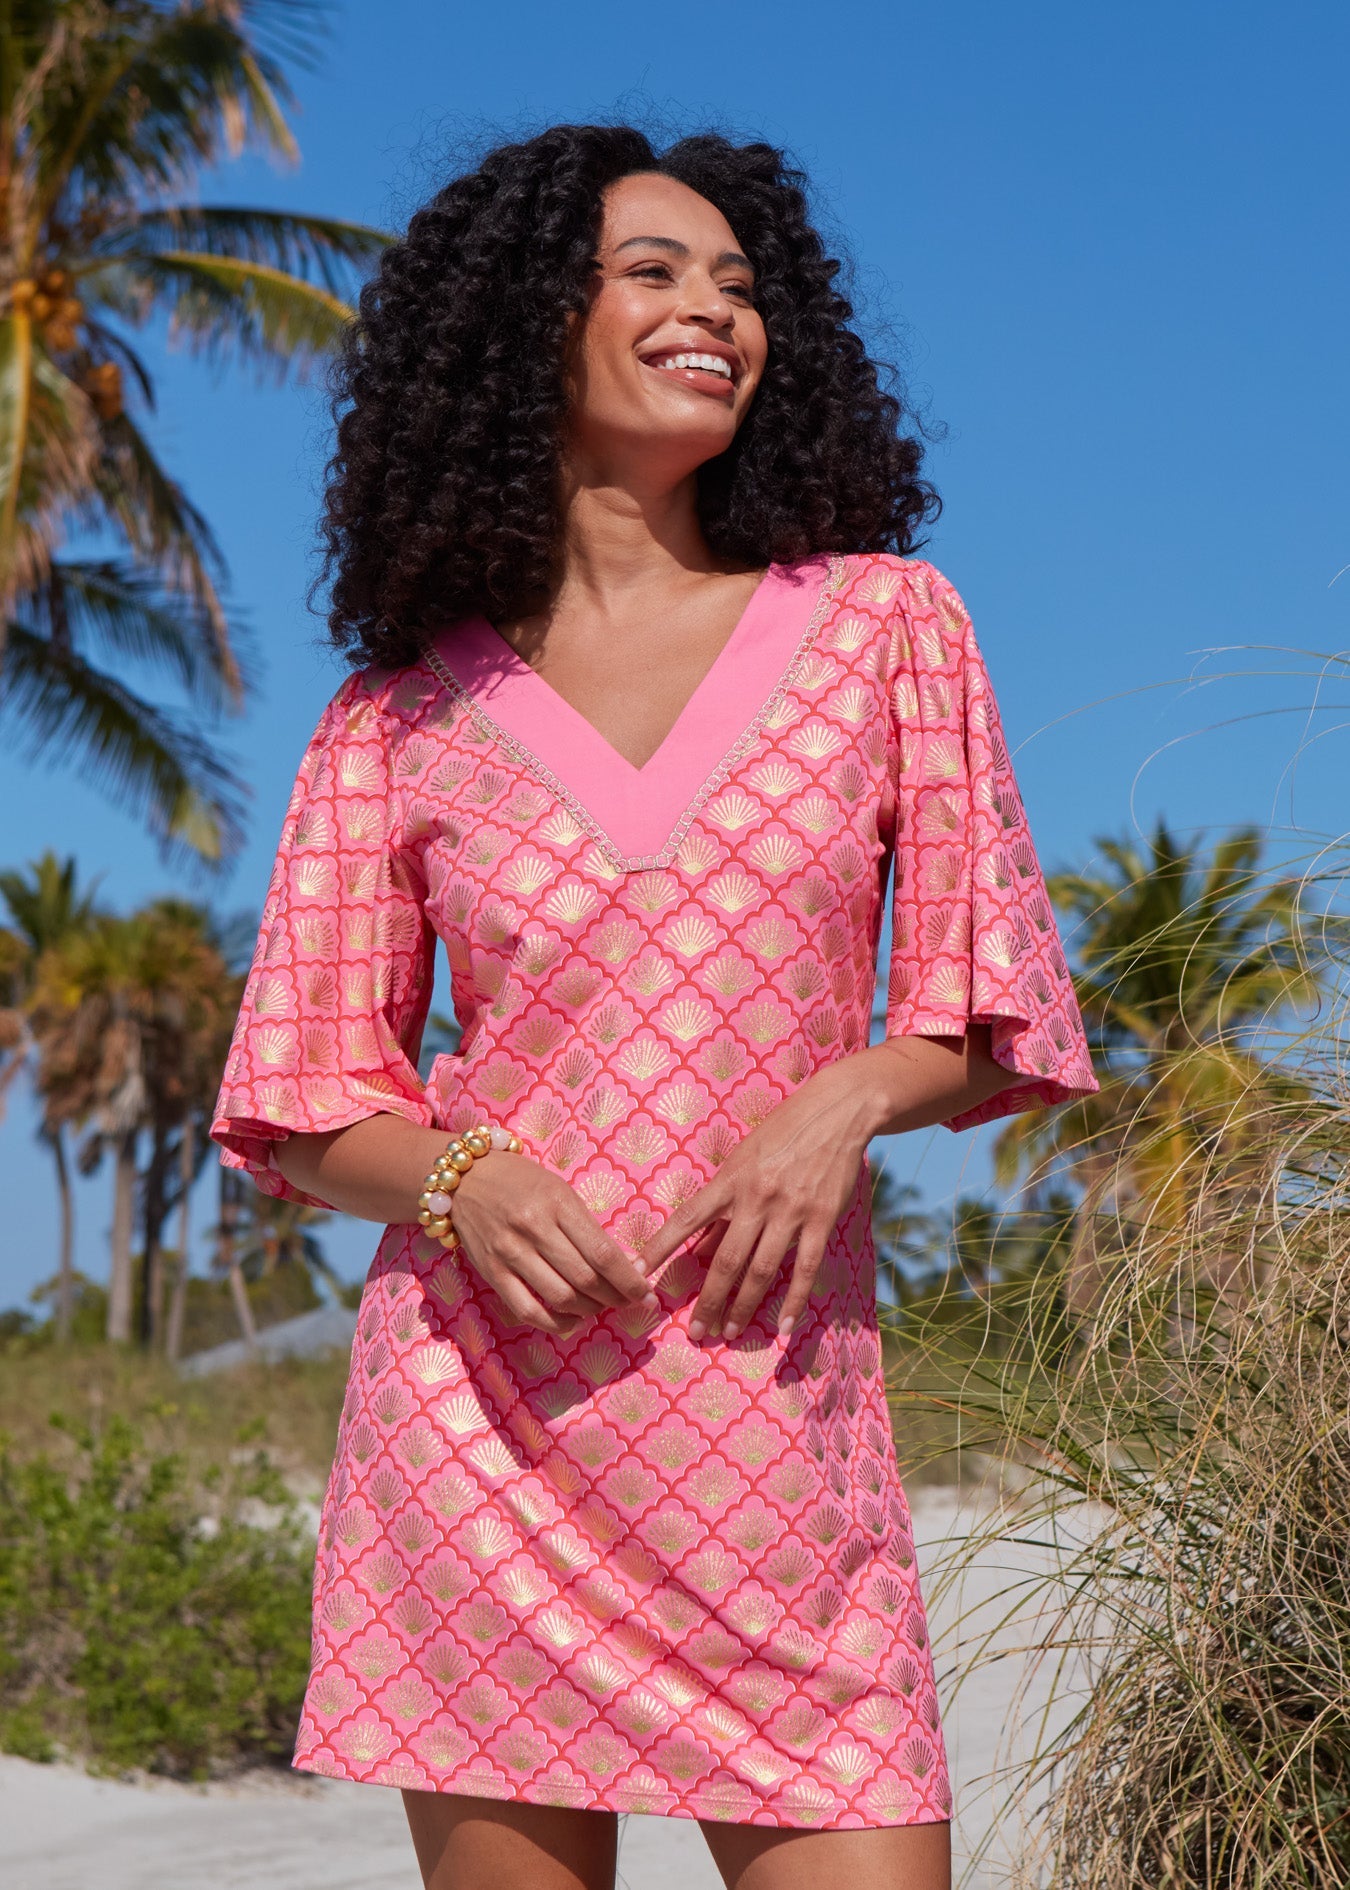 A woman with dark curly hair and arms crossed wearing the Coral Metallic Embroidered Flutter Sleeve Shift Dress on the beach.